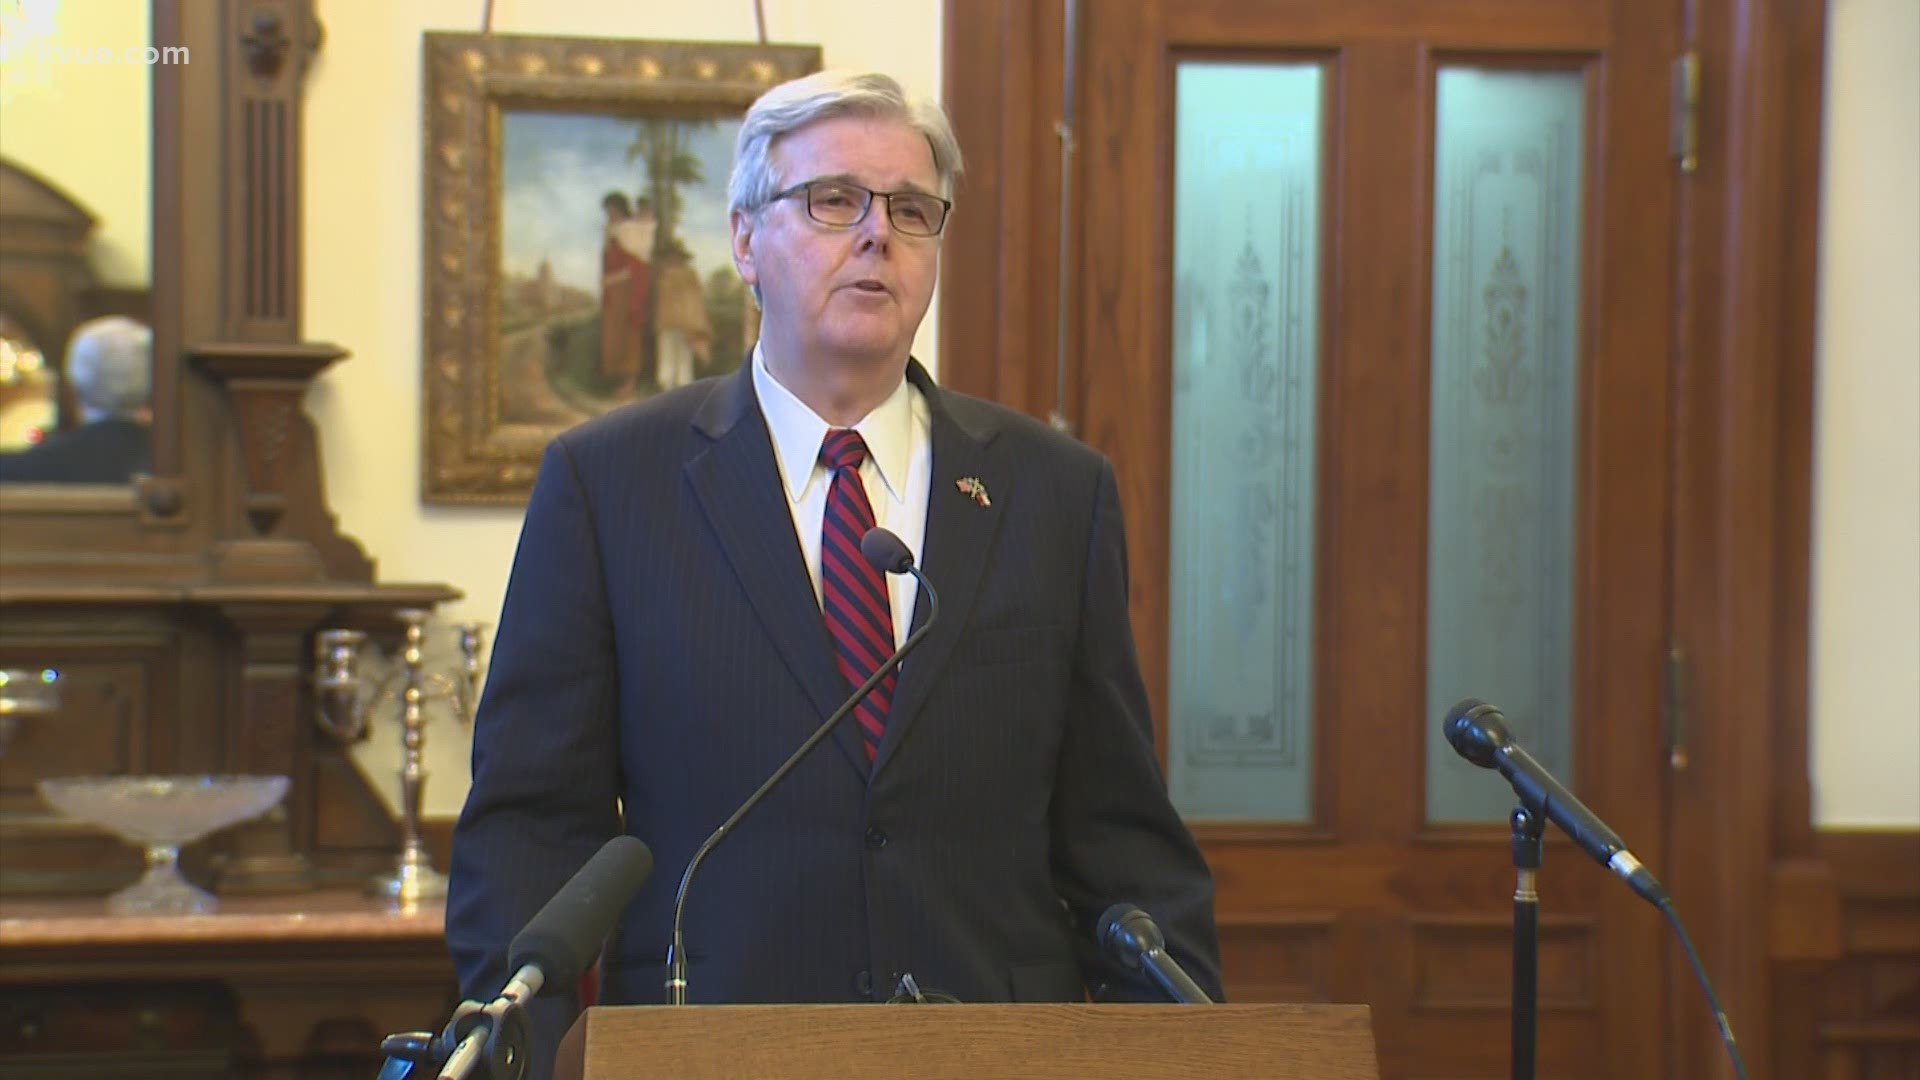 Lt. Gov. Dan Patrick is calling on Gov. Greg Abbott to use emergency powers to tell ERCOT to correct electricity prices following February's winter storms.